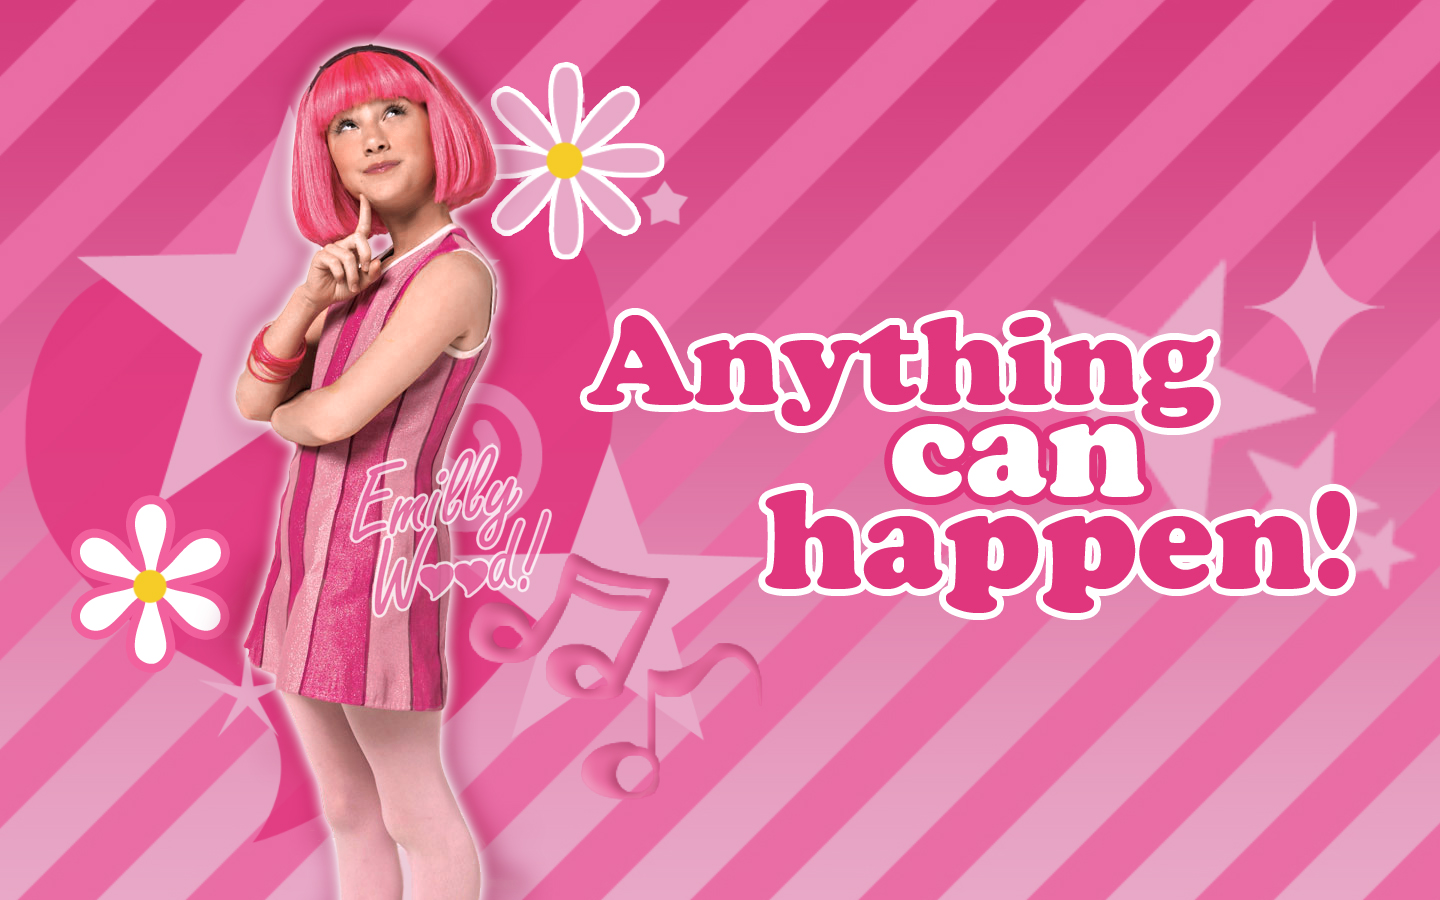 Wallpaper Anything can happen by emillywood on DeviantArt